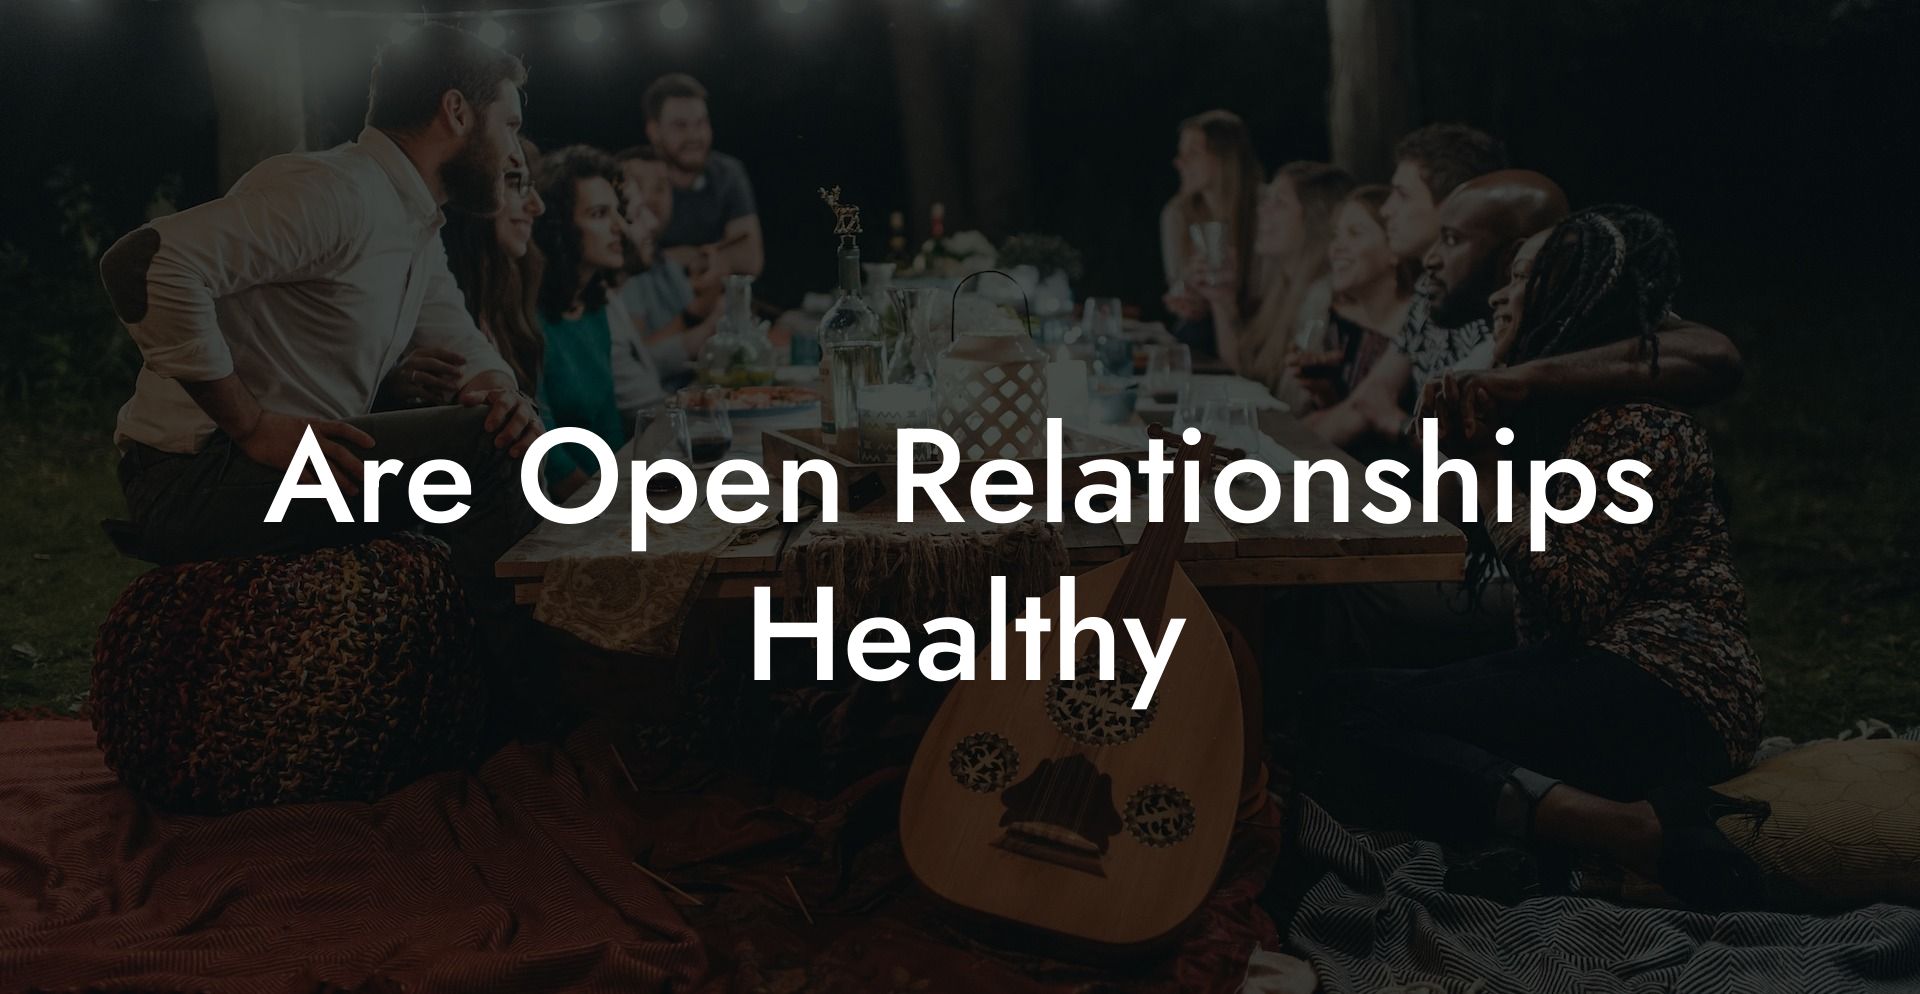 Are Open Relationships Healthy